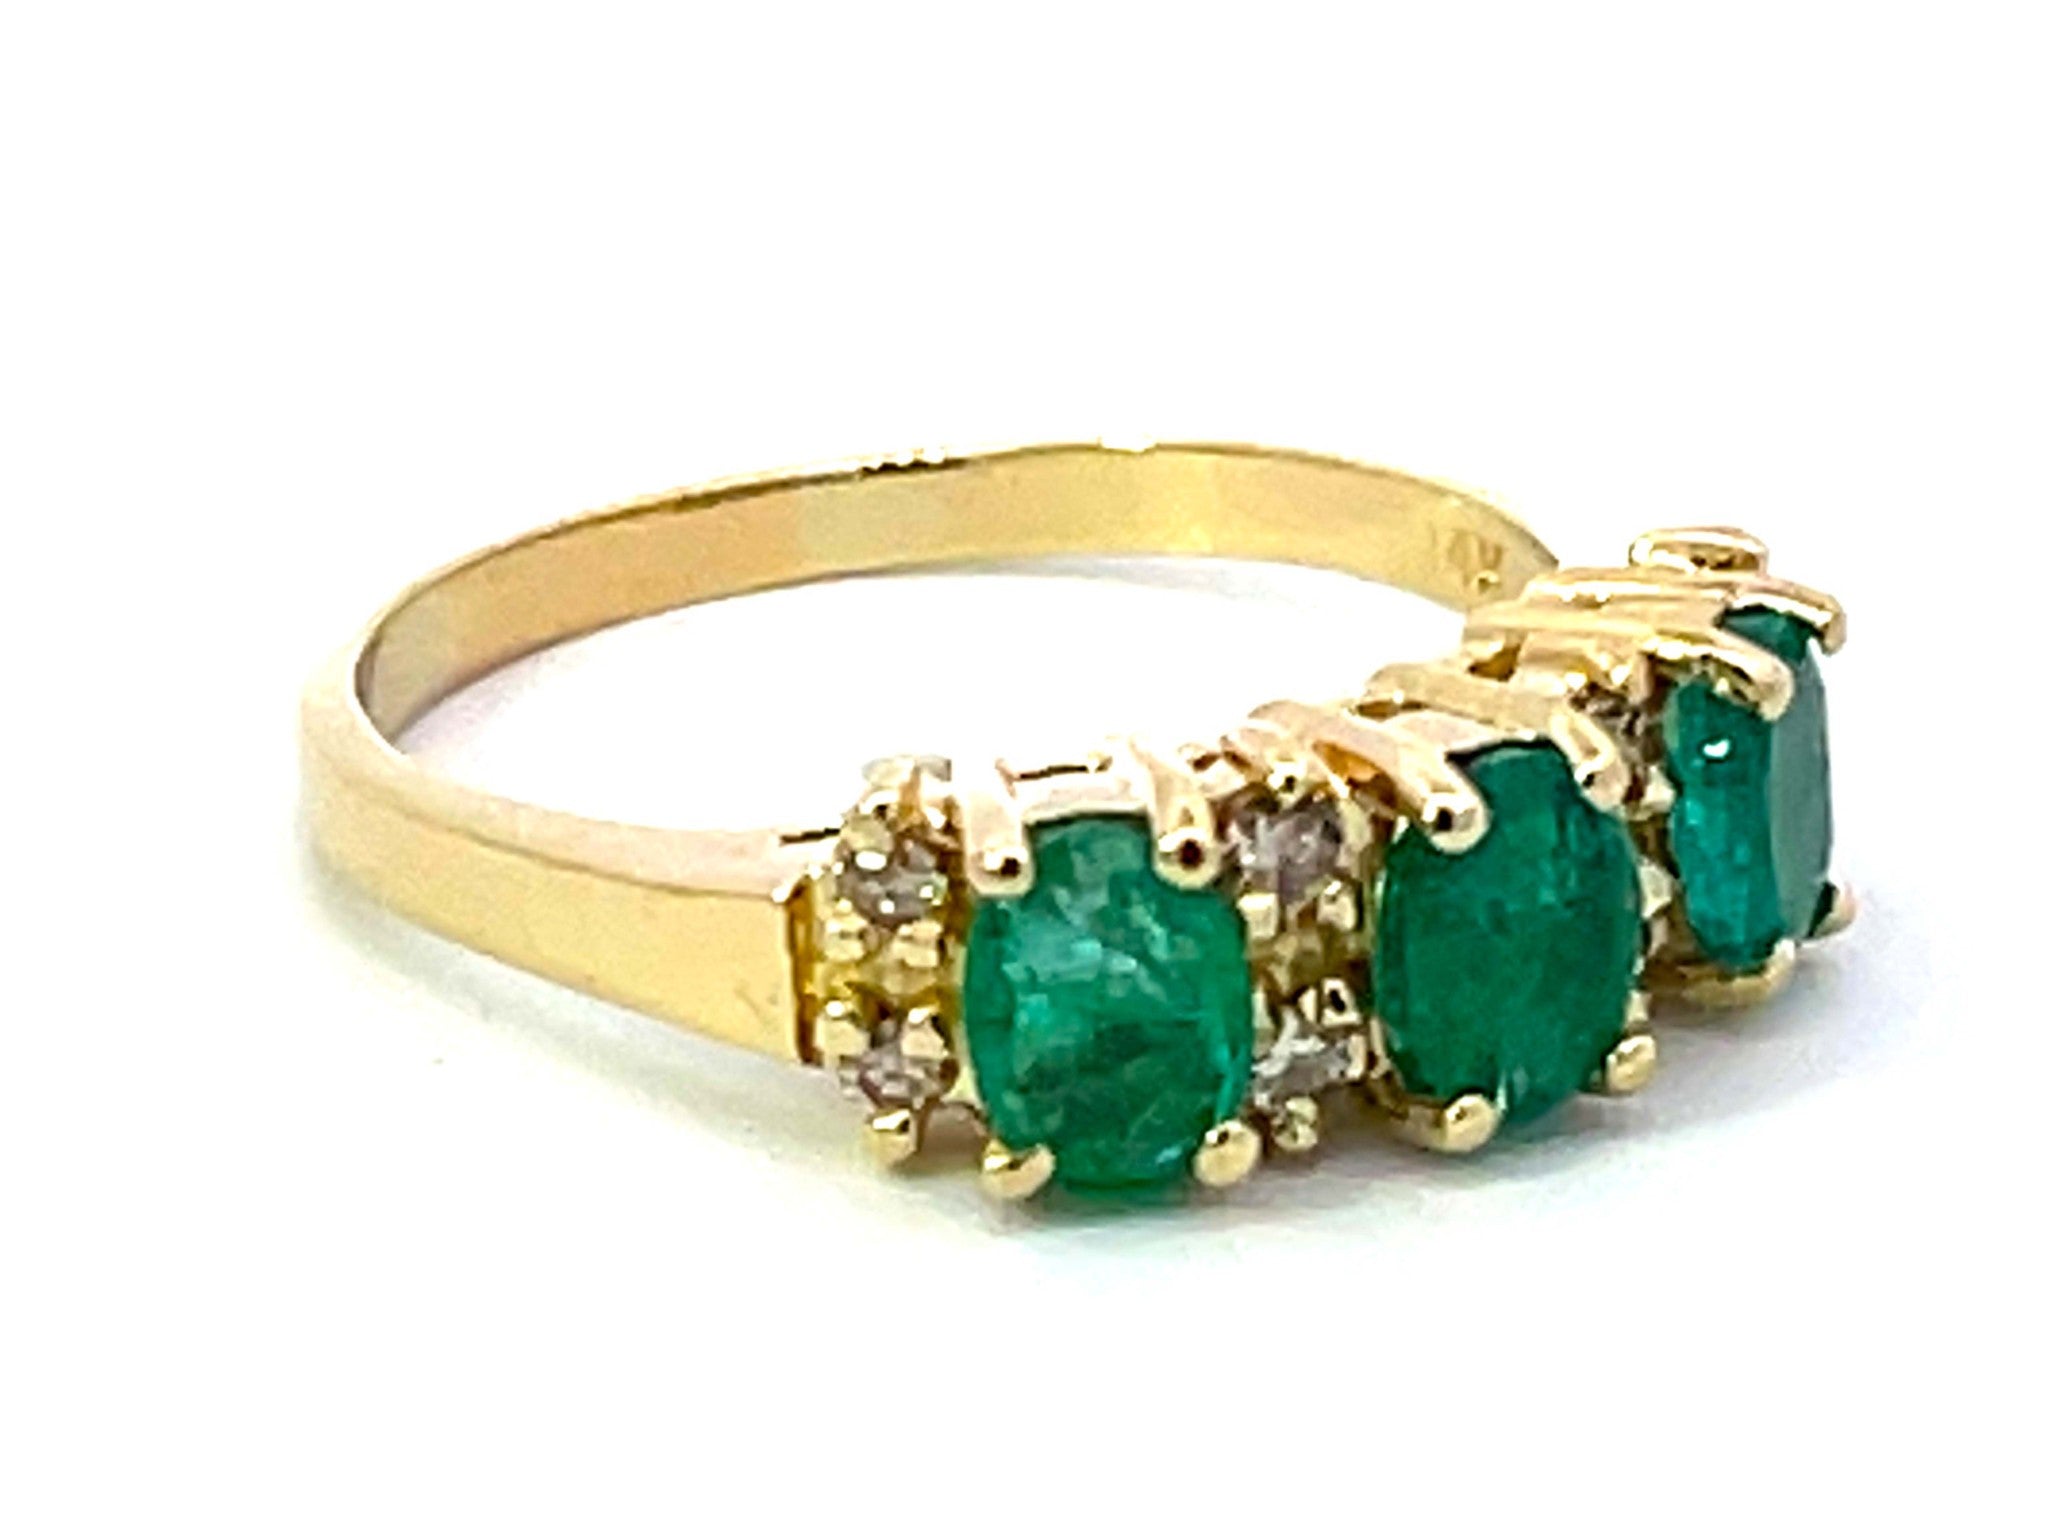 3 Oval Green Emerald and Diamond Band Ring in 14k Yellow Gold